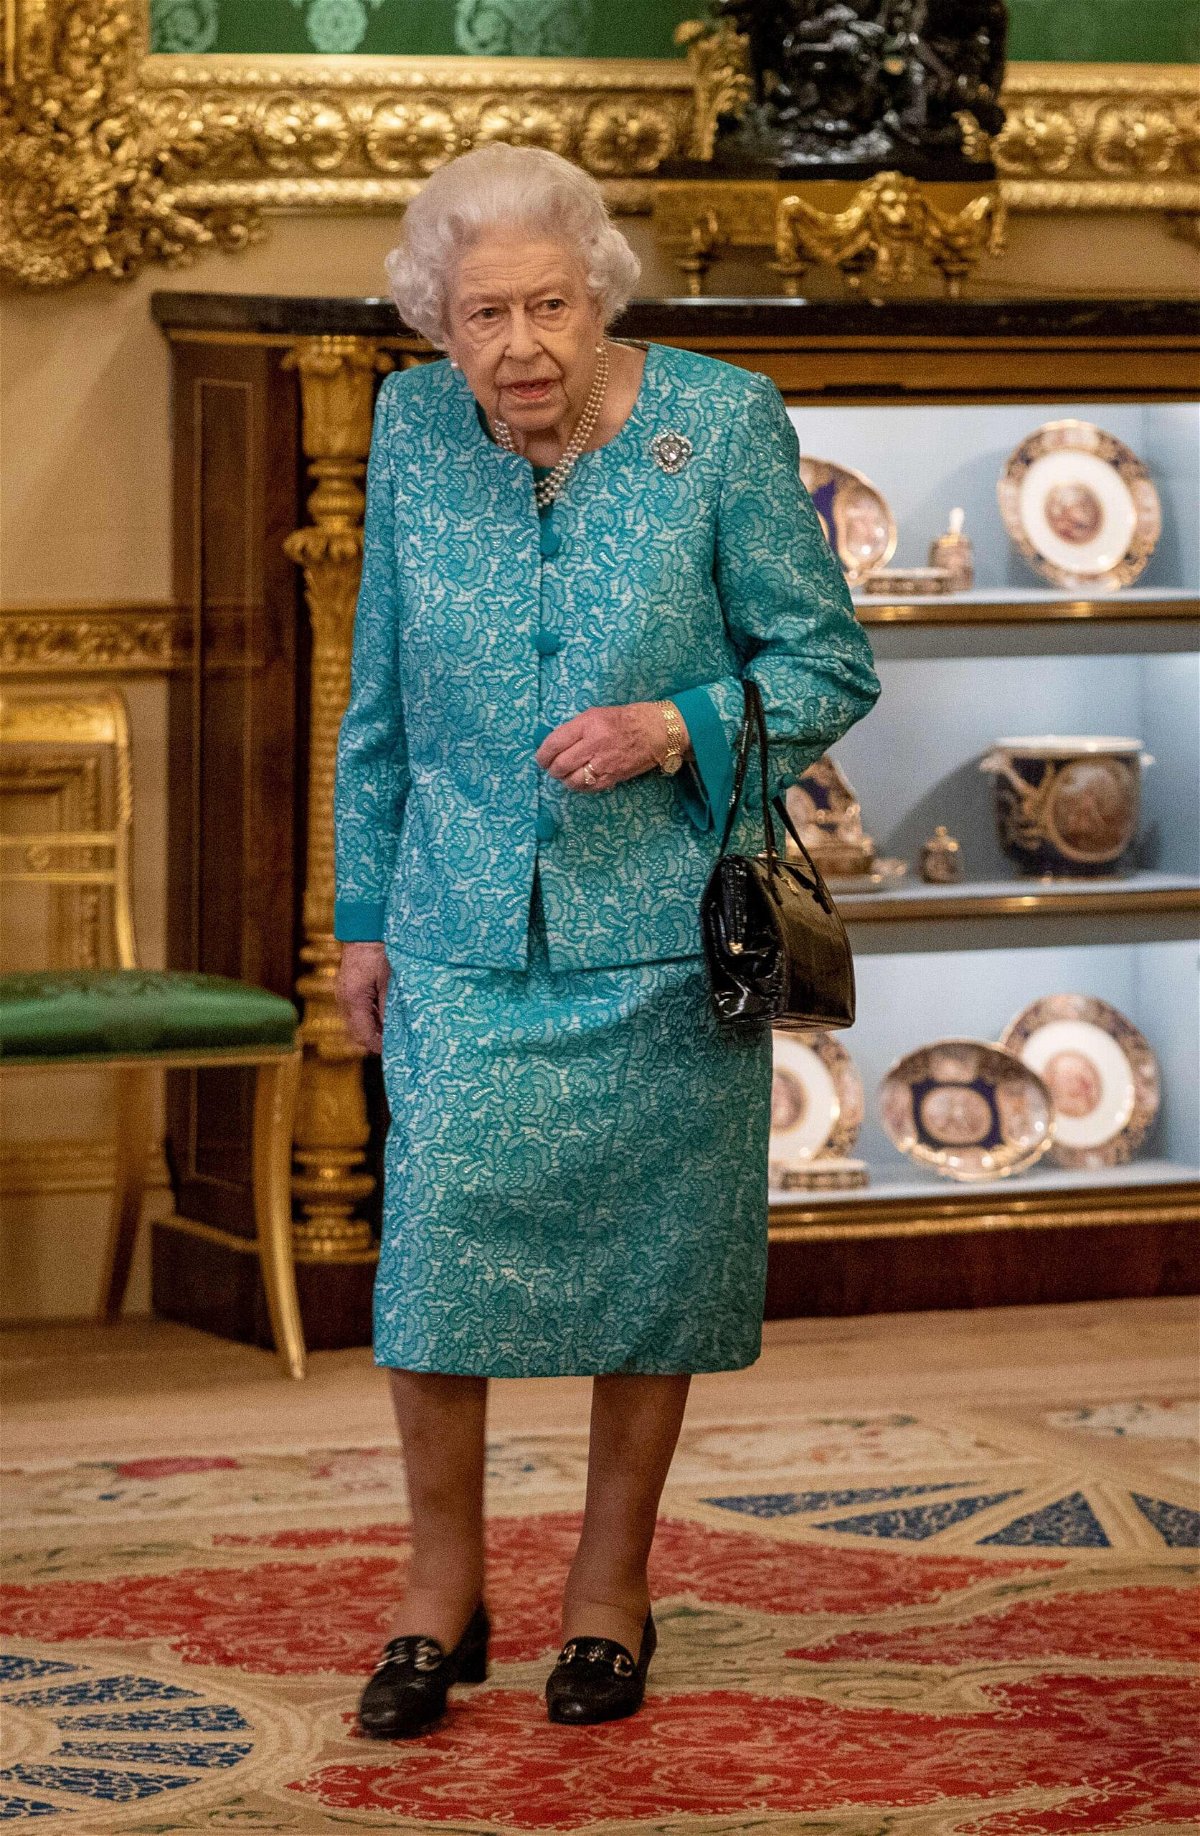 <i>Arthur Edwards/Pool/Getty Images</i><br/>Queen Elizabeth II arrives to greet guests during a reception for international business and investment leaders at Windsor Castle to mark the Global Investment Summit on October 19 in Windsor